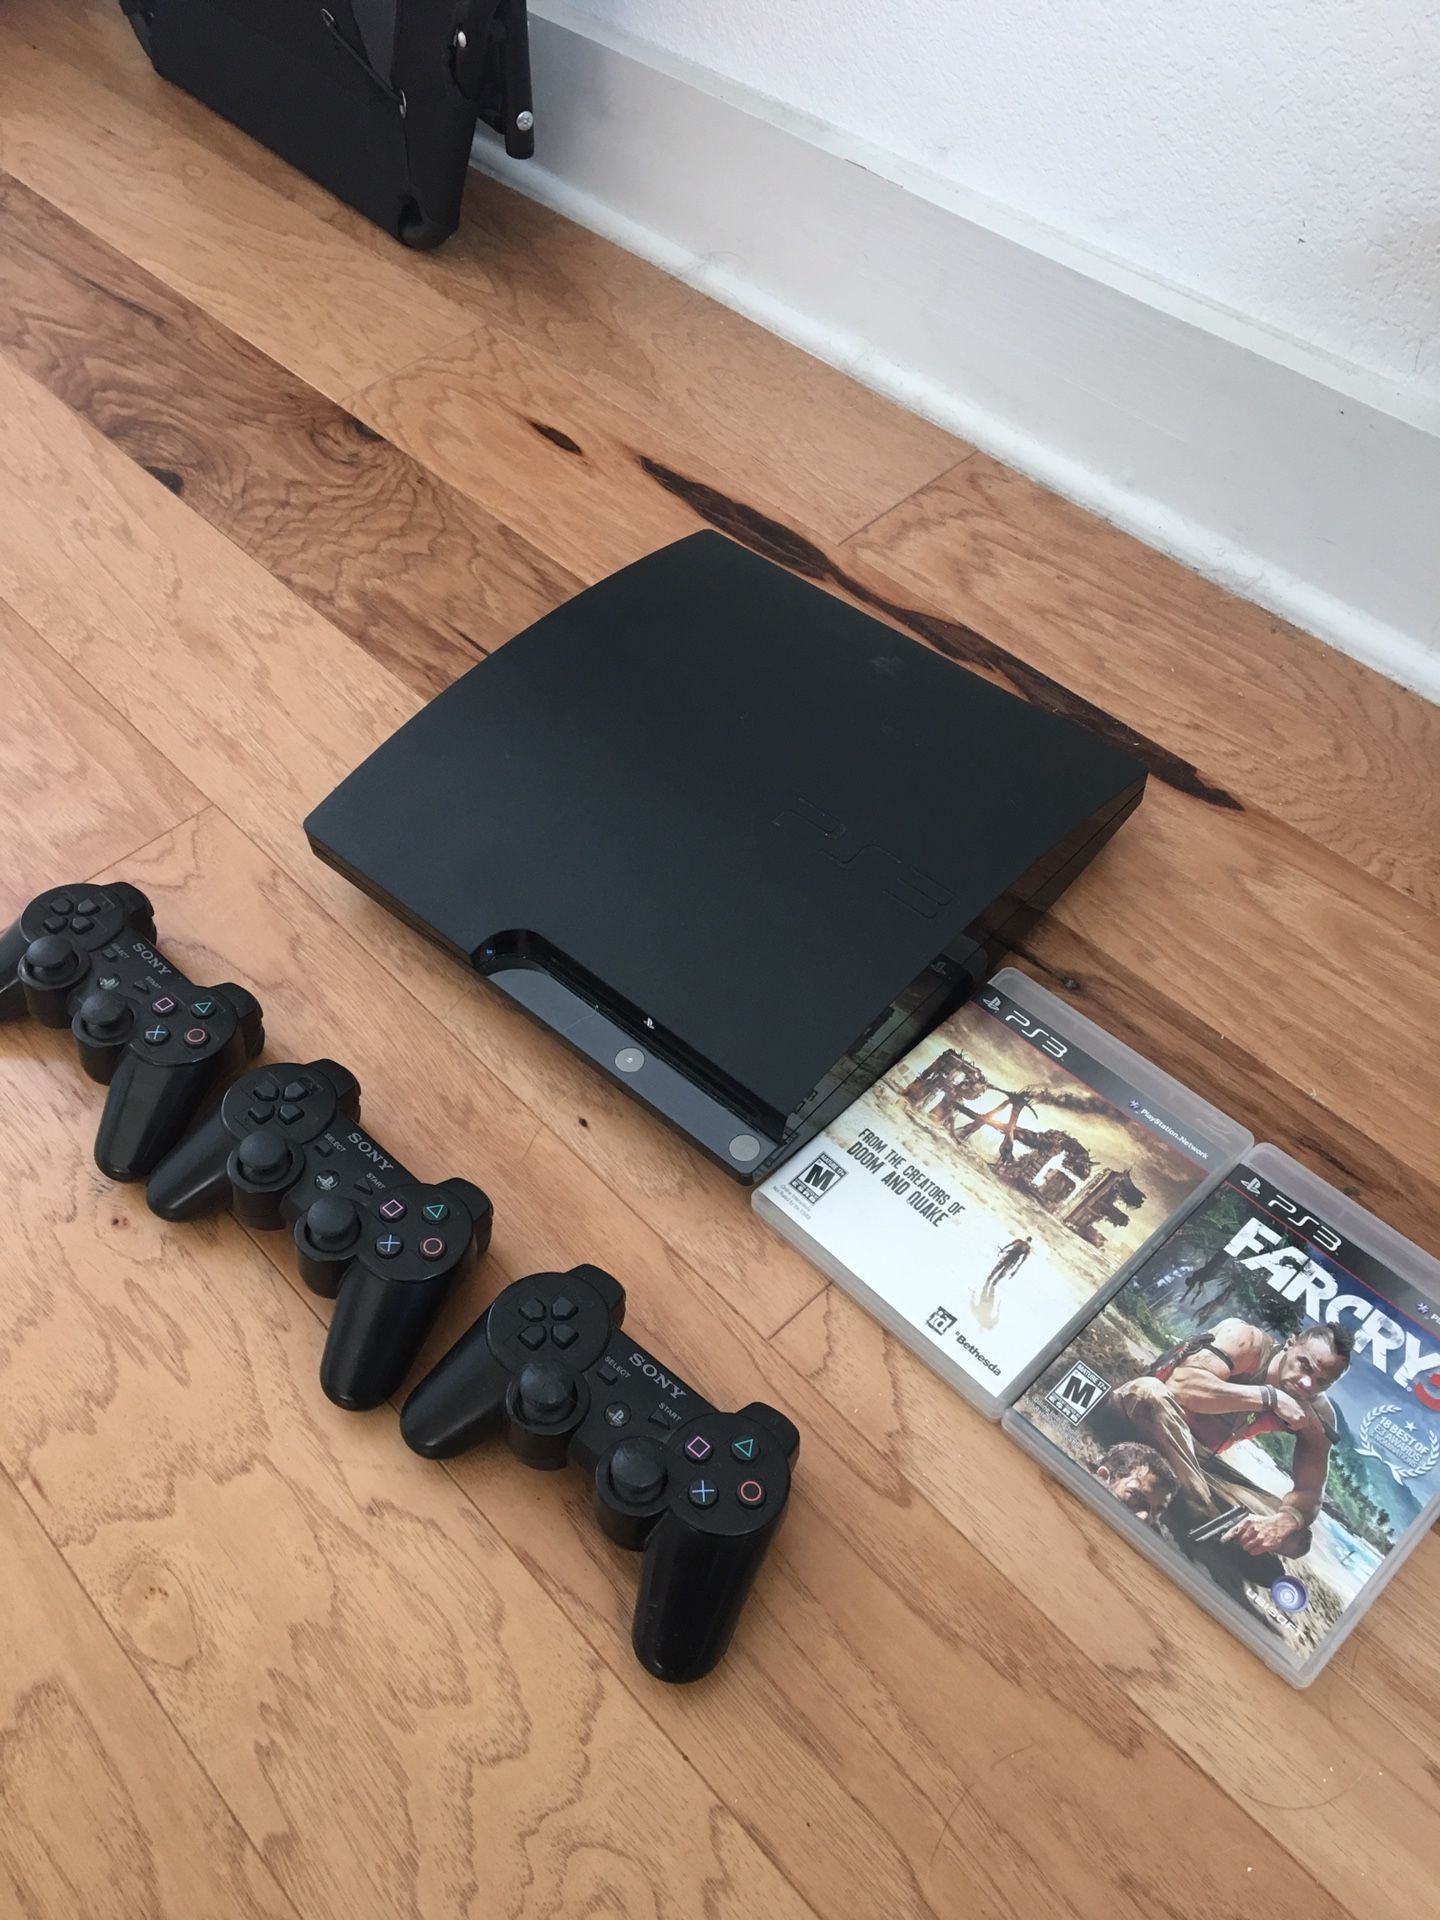 PS3 plus 3 controllers and 2 games